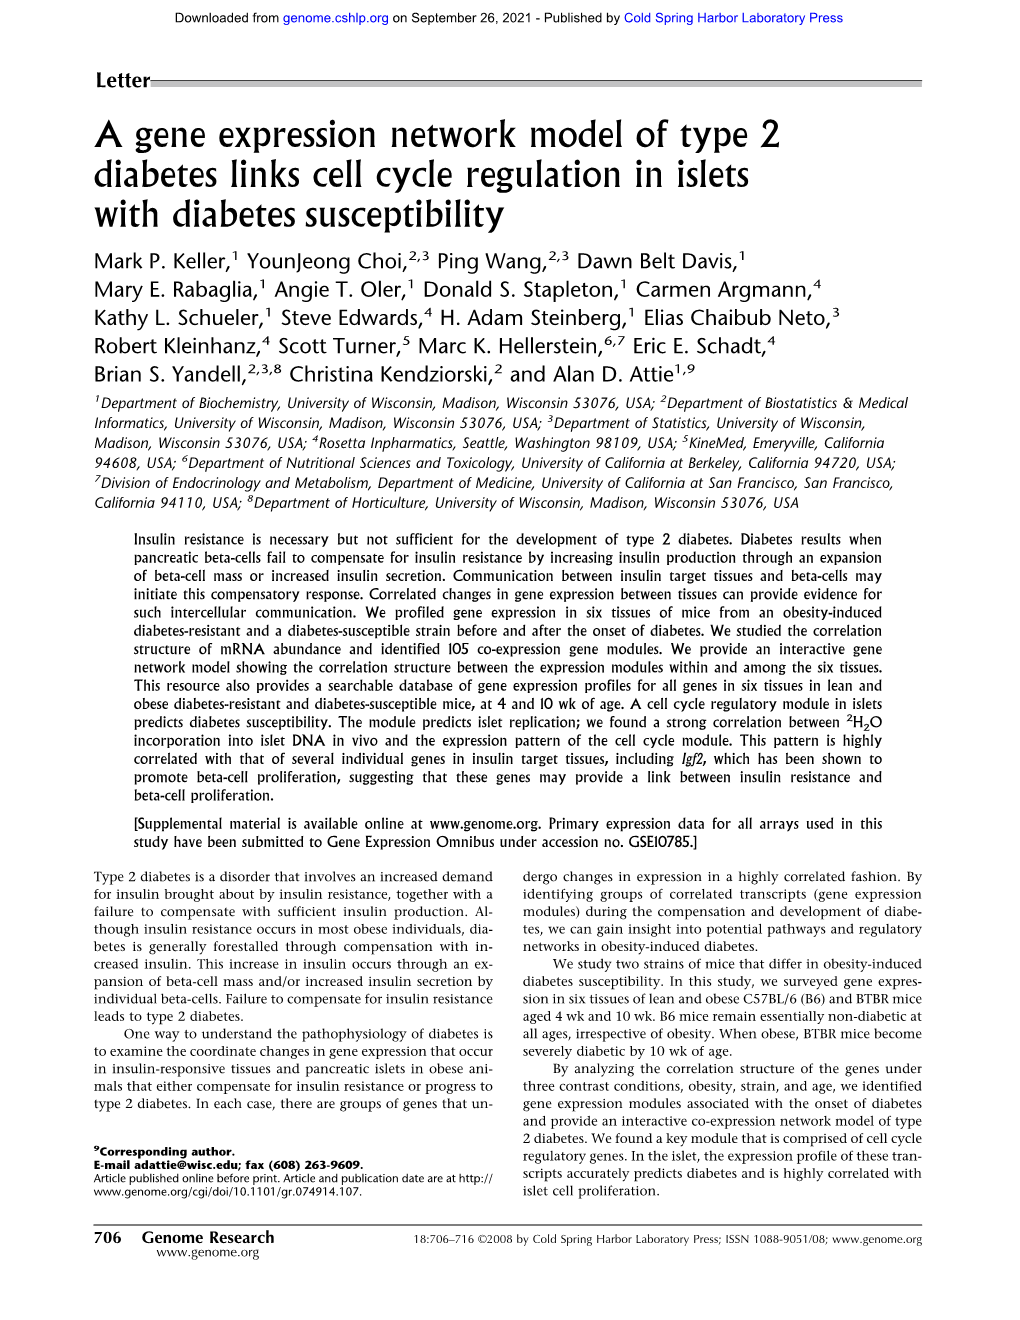 A Gene Expression Network Model of Type 2 Diabetes Links Cell Cycle Regulation in Islets with Diabetes Susceptibility Mark P